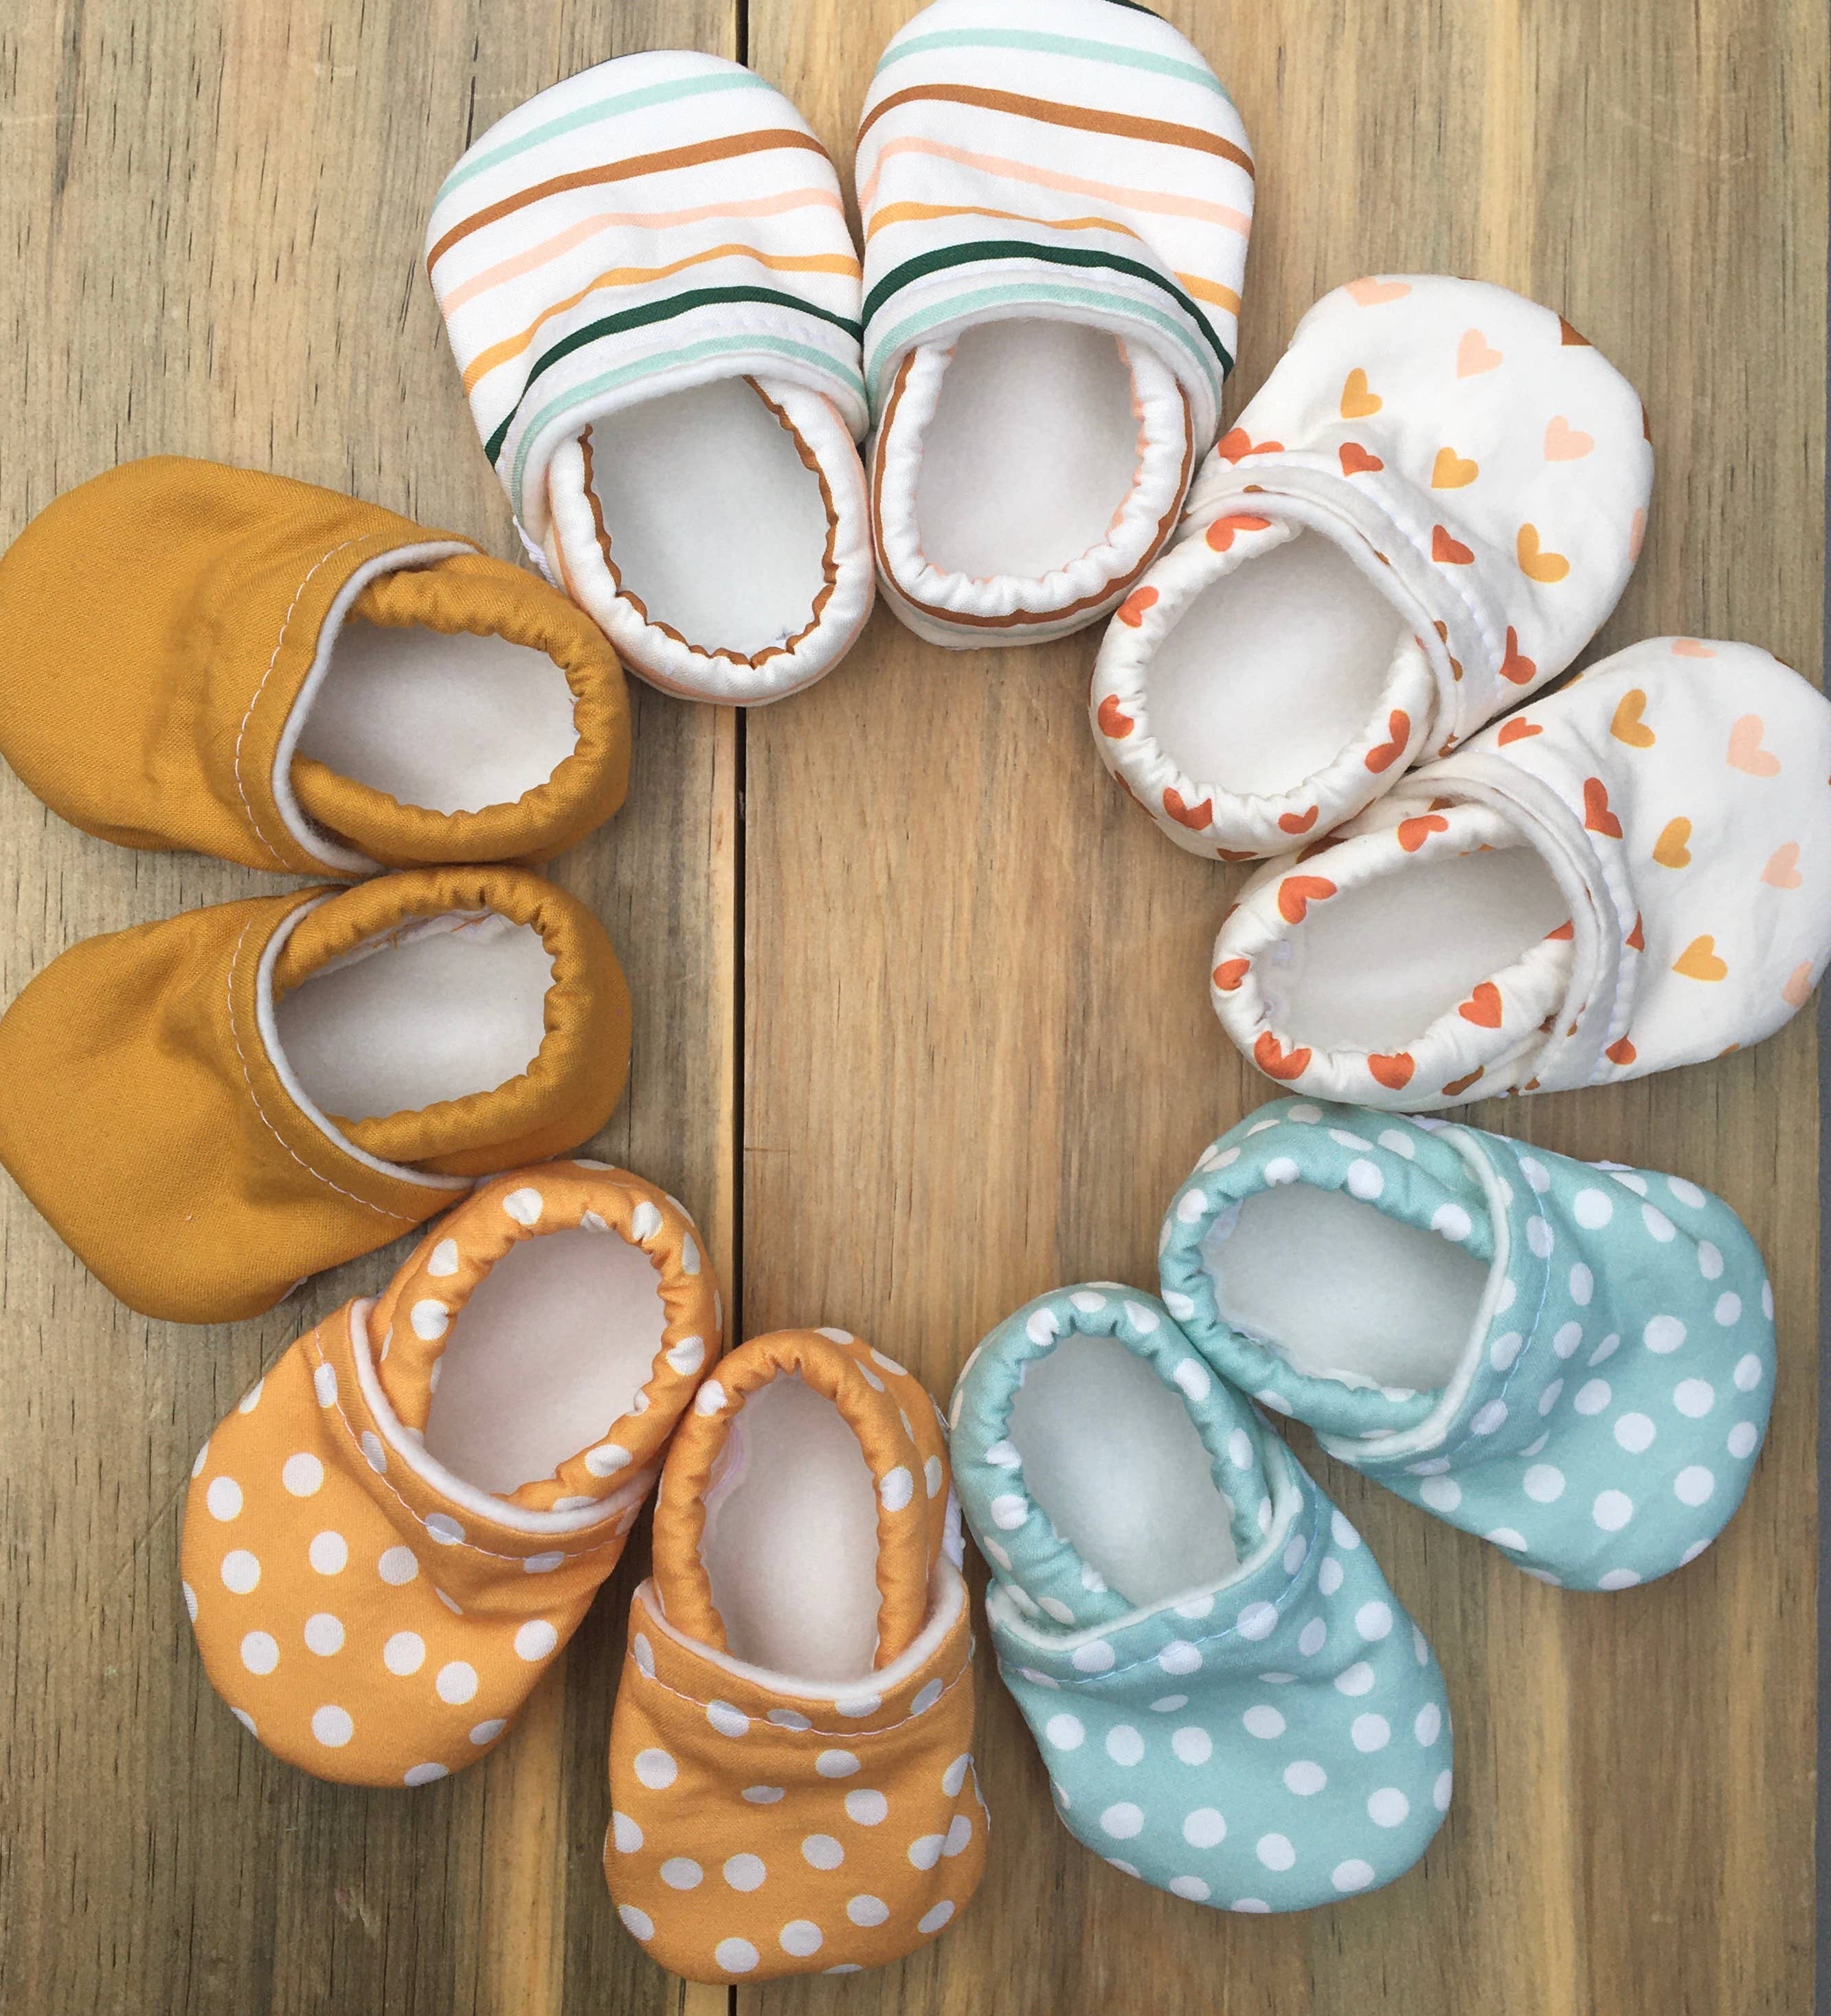 buy baby shoes near me